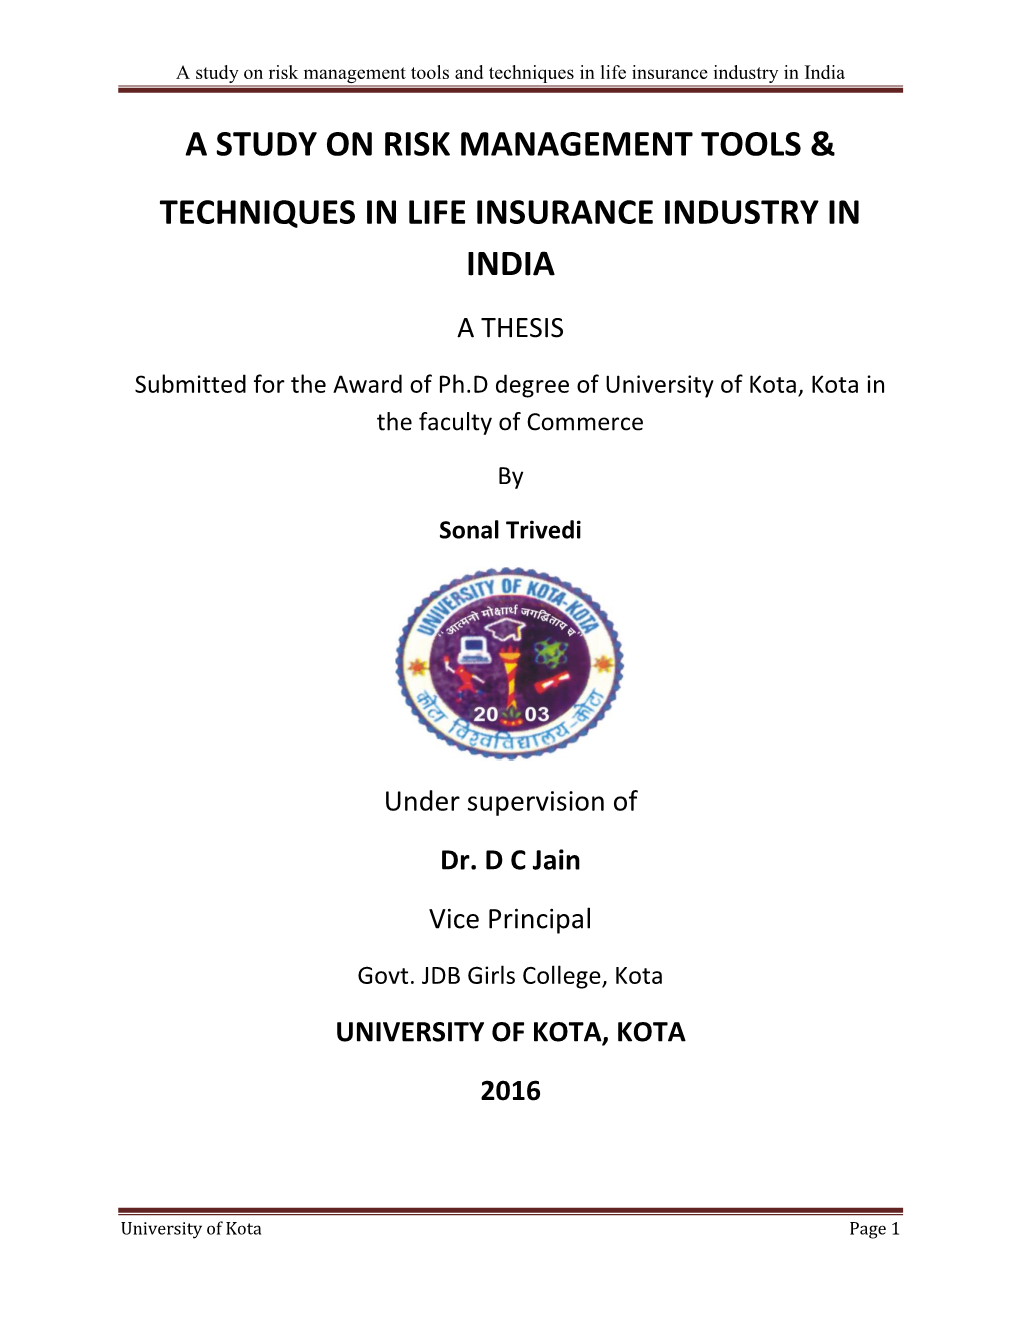 A Study on Risk Management Tools and Techniques in Life Insurance Industry in India